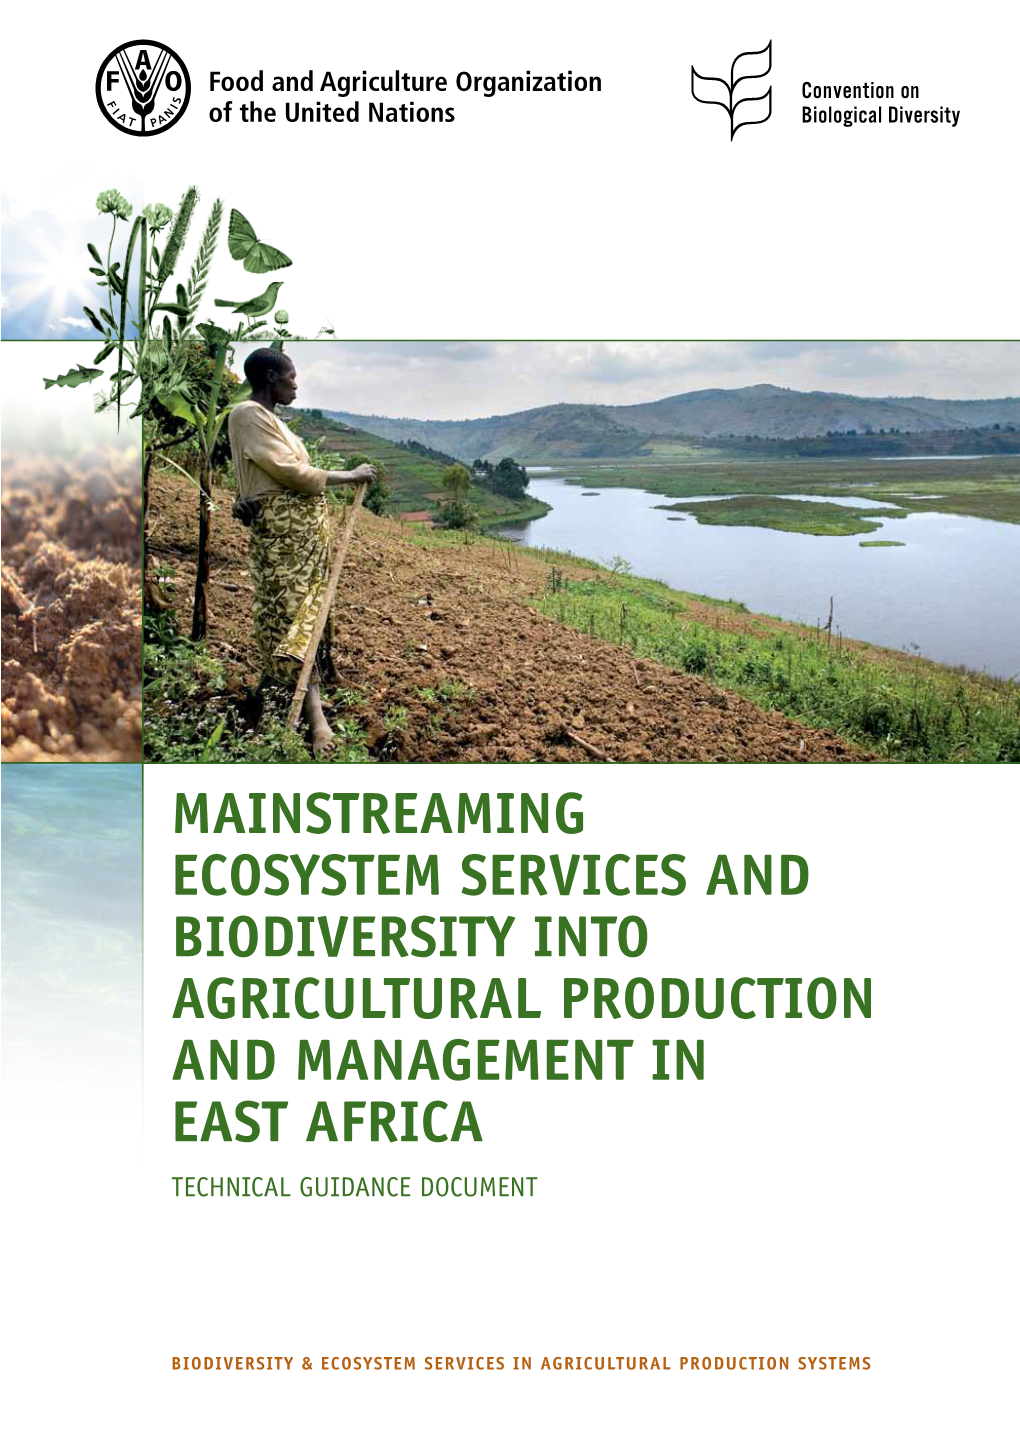 Mainstreaming Ecosystem Services and Biodiversity Into Agricultural Production and Management in East Africa Technical Guidance Document